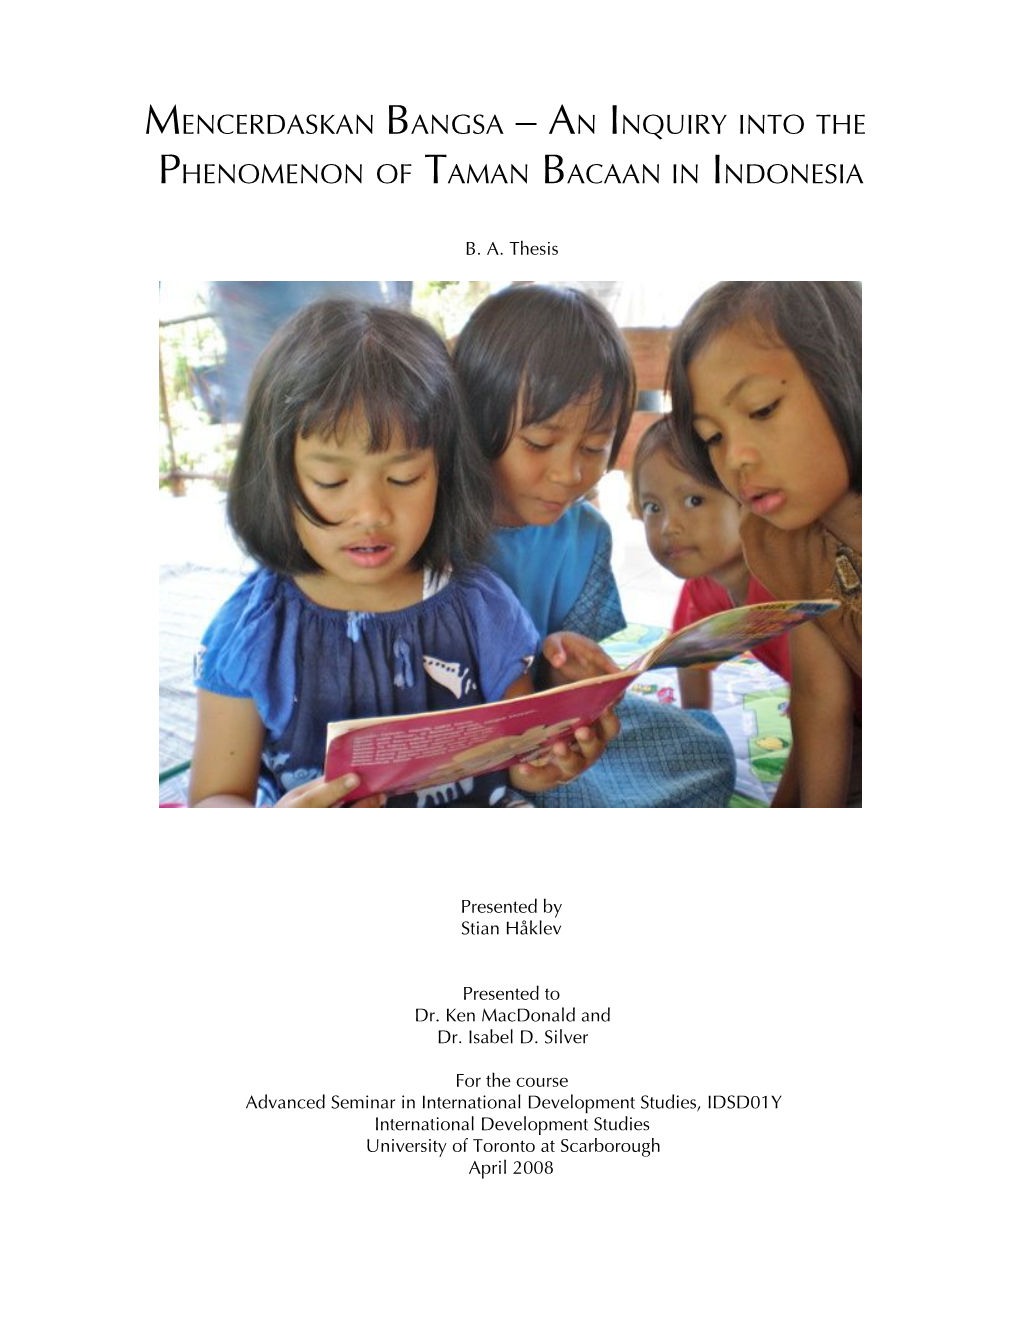 An Inquiry Into the Phenomenon of Taman Bacaan in Indonesia